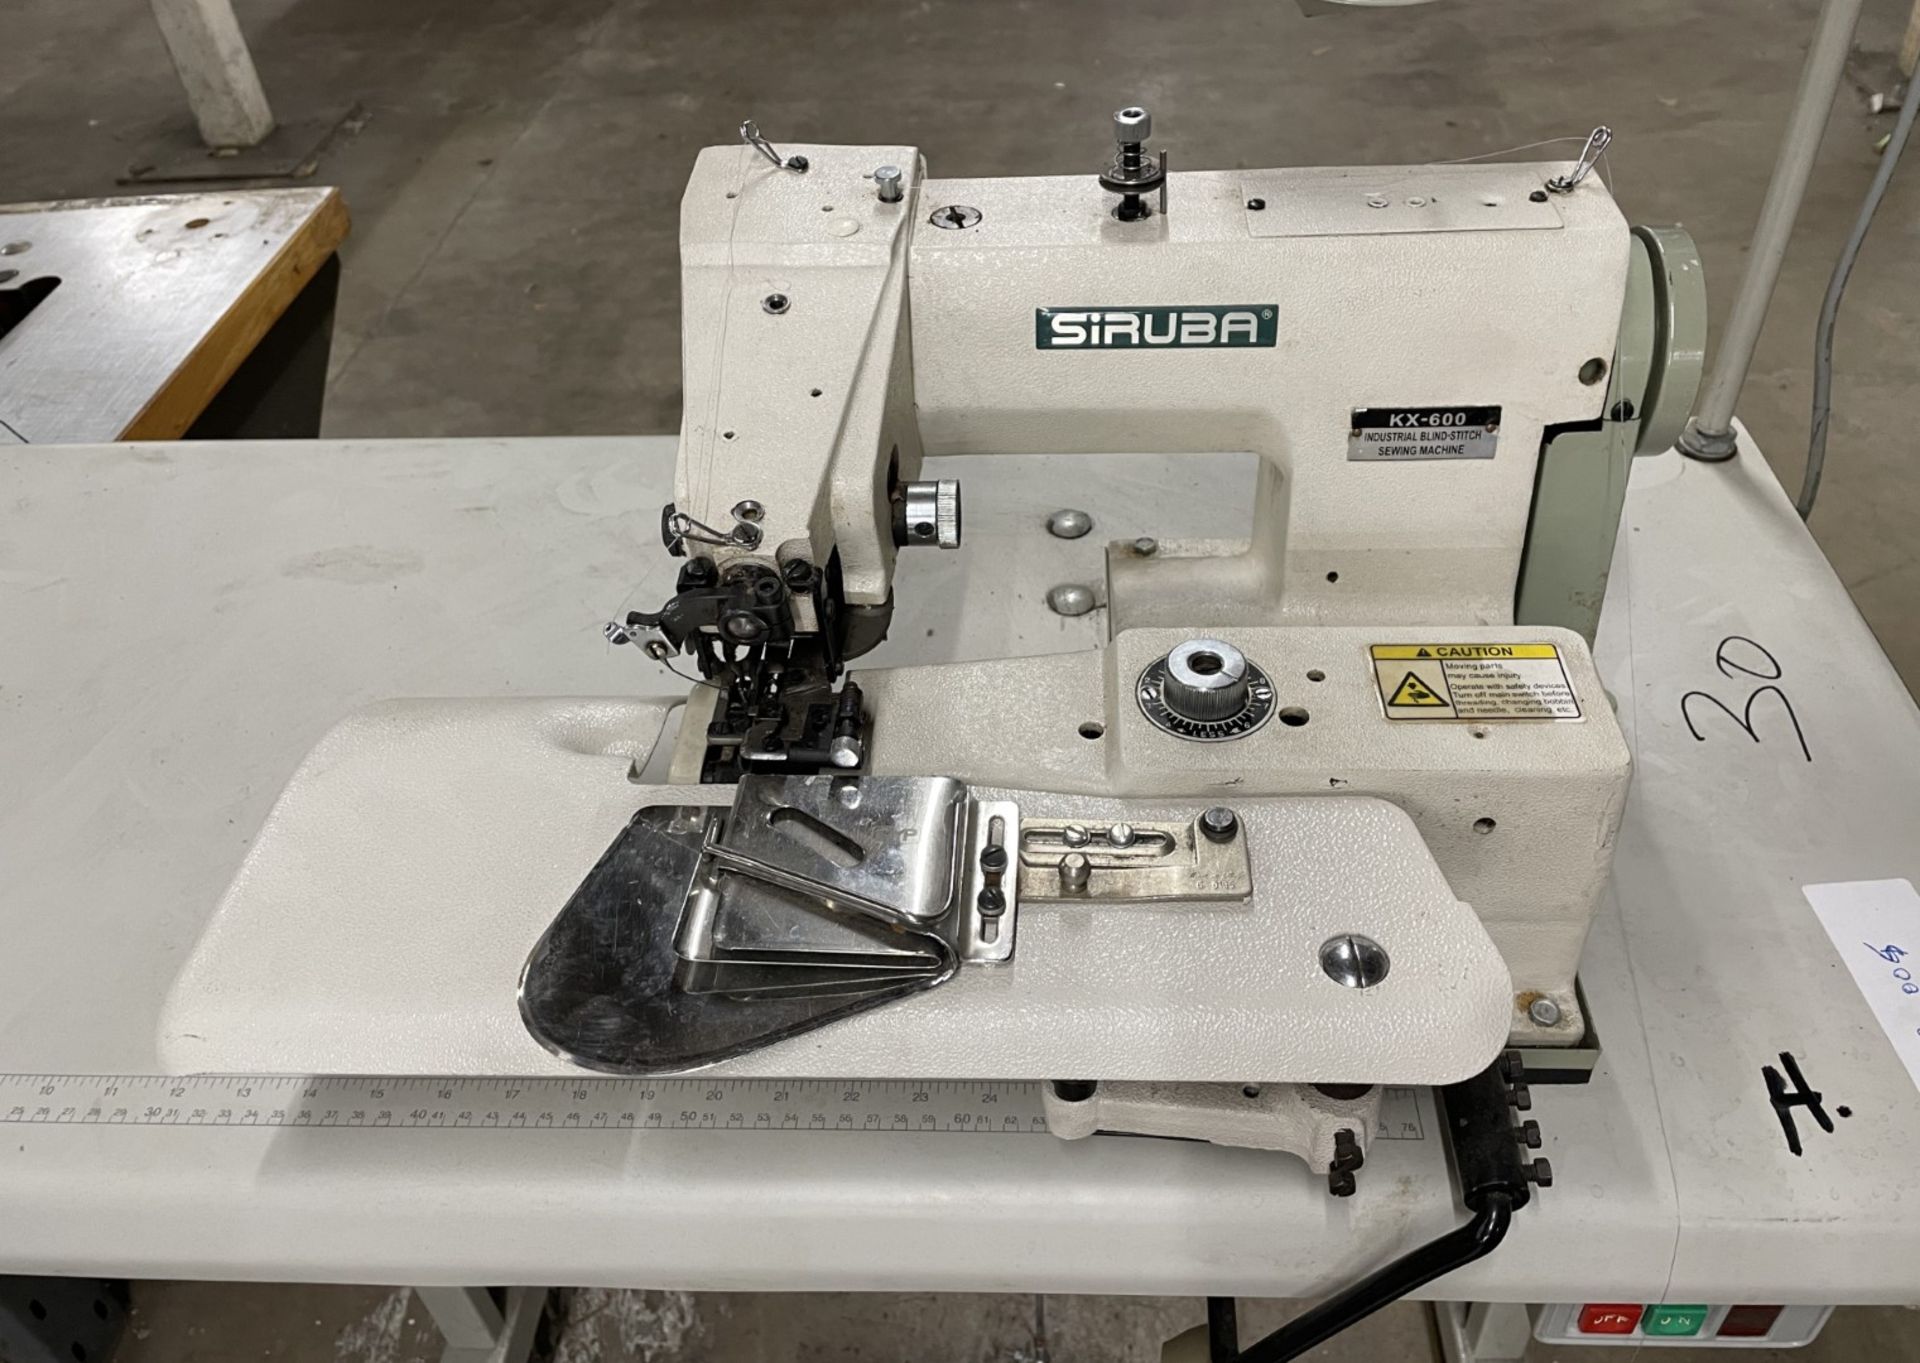 1 x Siruba KX-600 Industrial Blind Stitch Sewing Machine With Table - Image 2 of 13